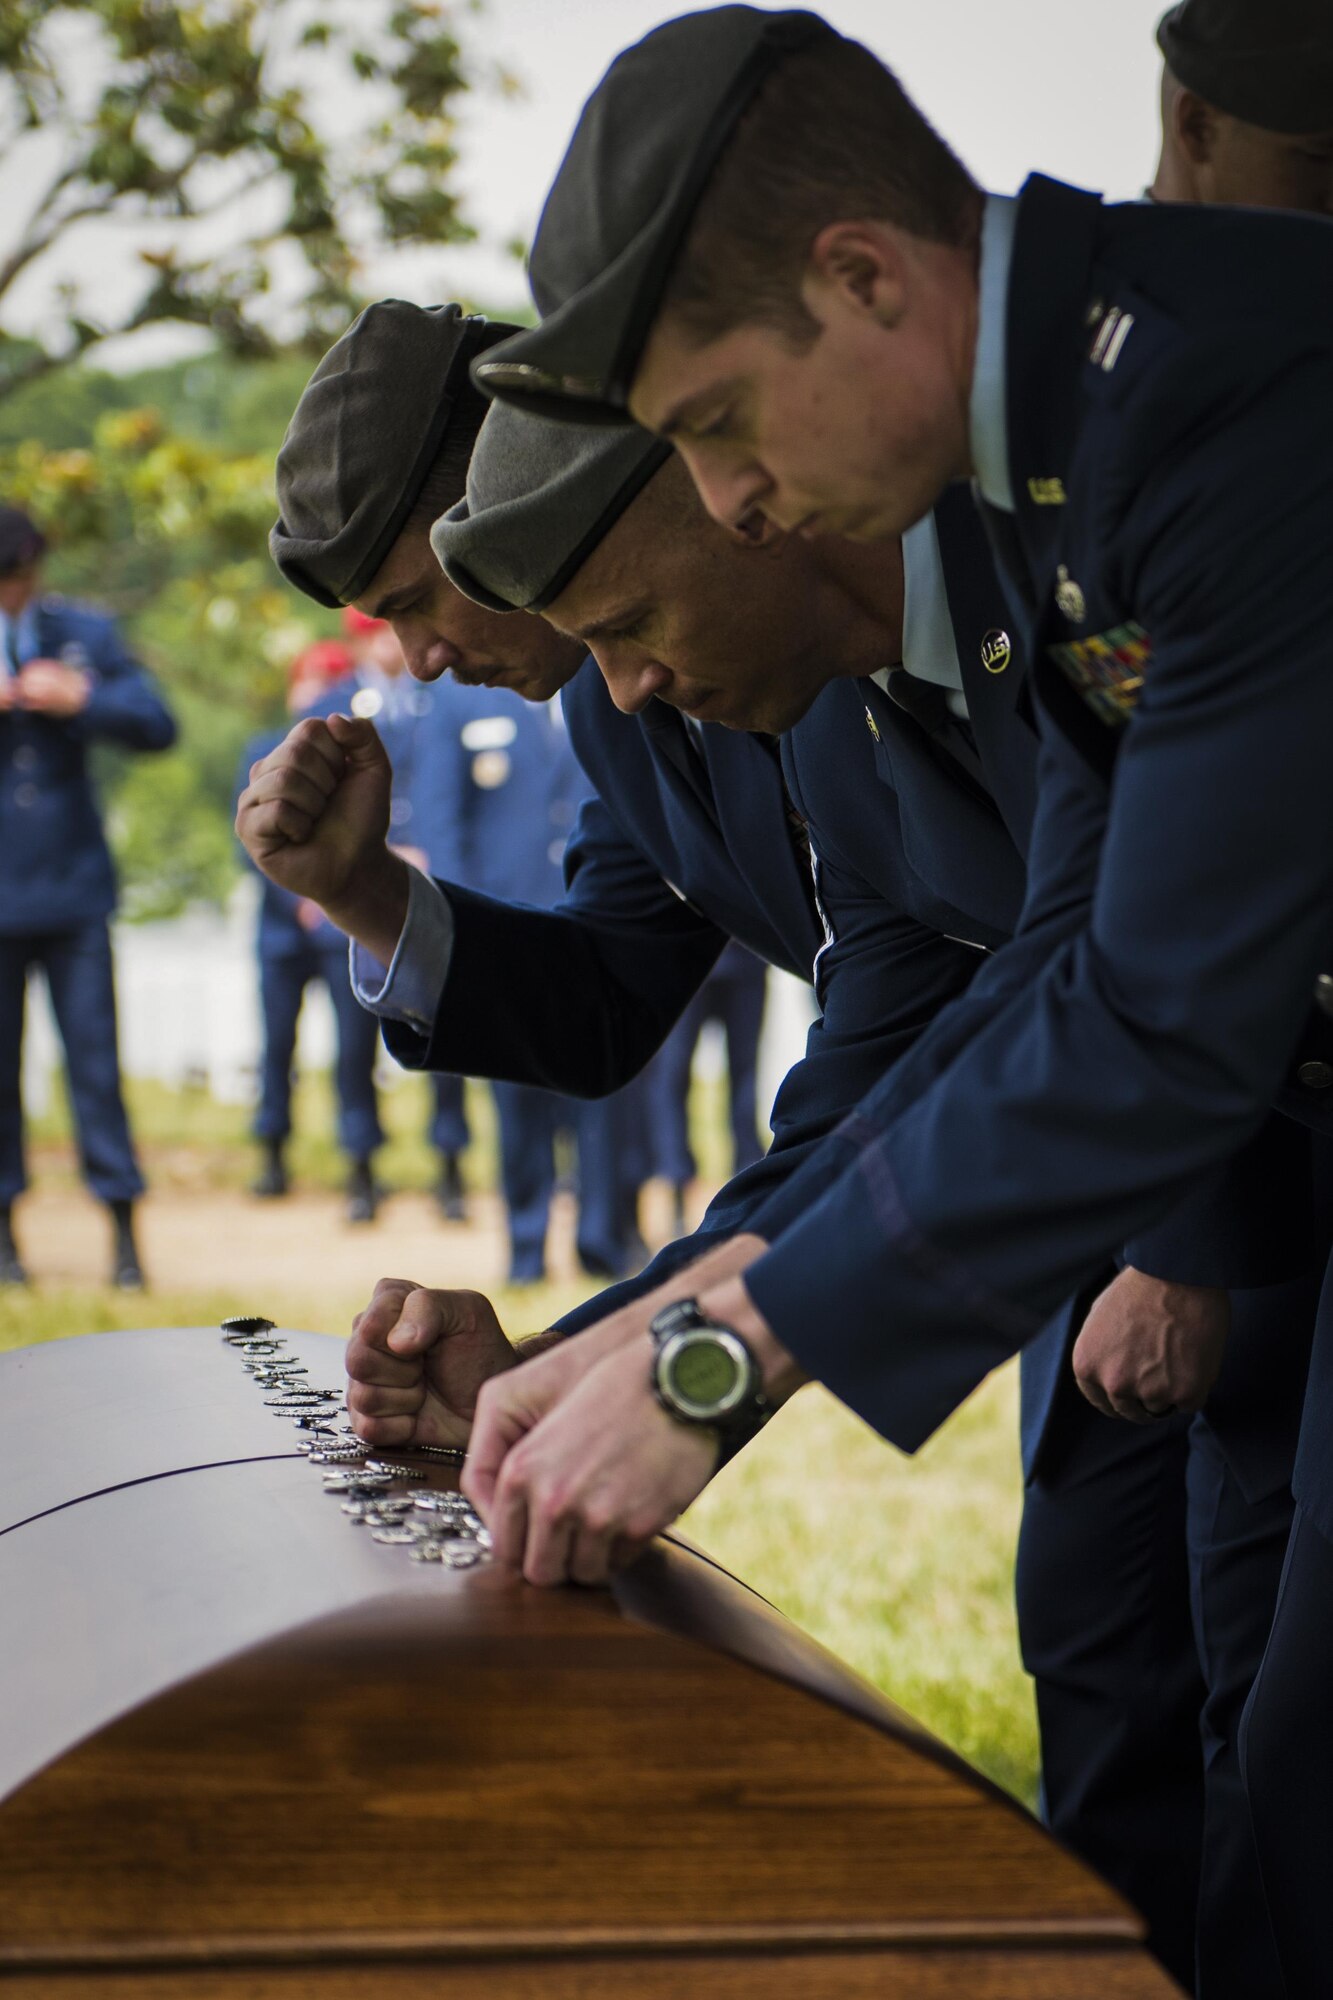 U.S. Air Force Special Operations Weather Team members pound their career badge – or flash – into the casket of Lt. Col. William “Bill” Schroeder, during his interment ceremony, June 16, 2016, at Arlington National Cemetery, Virginia. Schroeder, 39, was a special operations weather officer who identified a perilous situation and reacted swiftly by putting himself between an armed individual and his first sergeant. In the process, he saved lives of other squadron members while being fatally wounded. (U.S. Air Force photo by Airman 1st Class Philip Bryant)